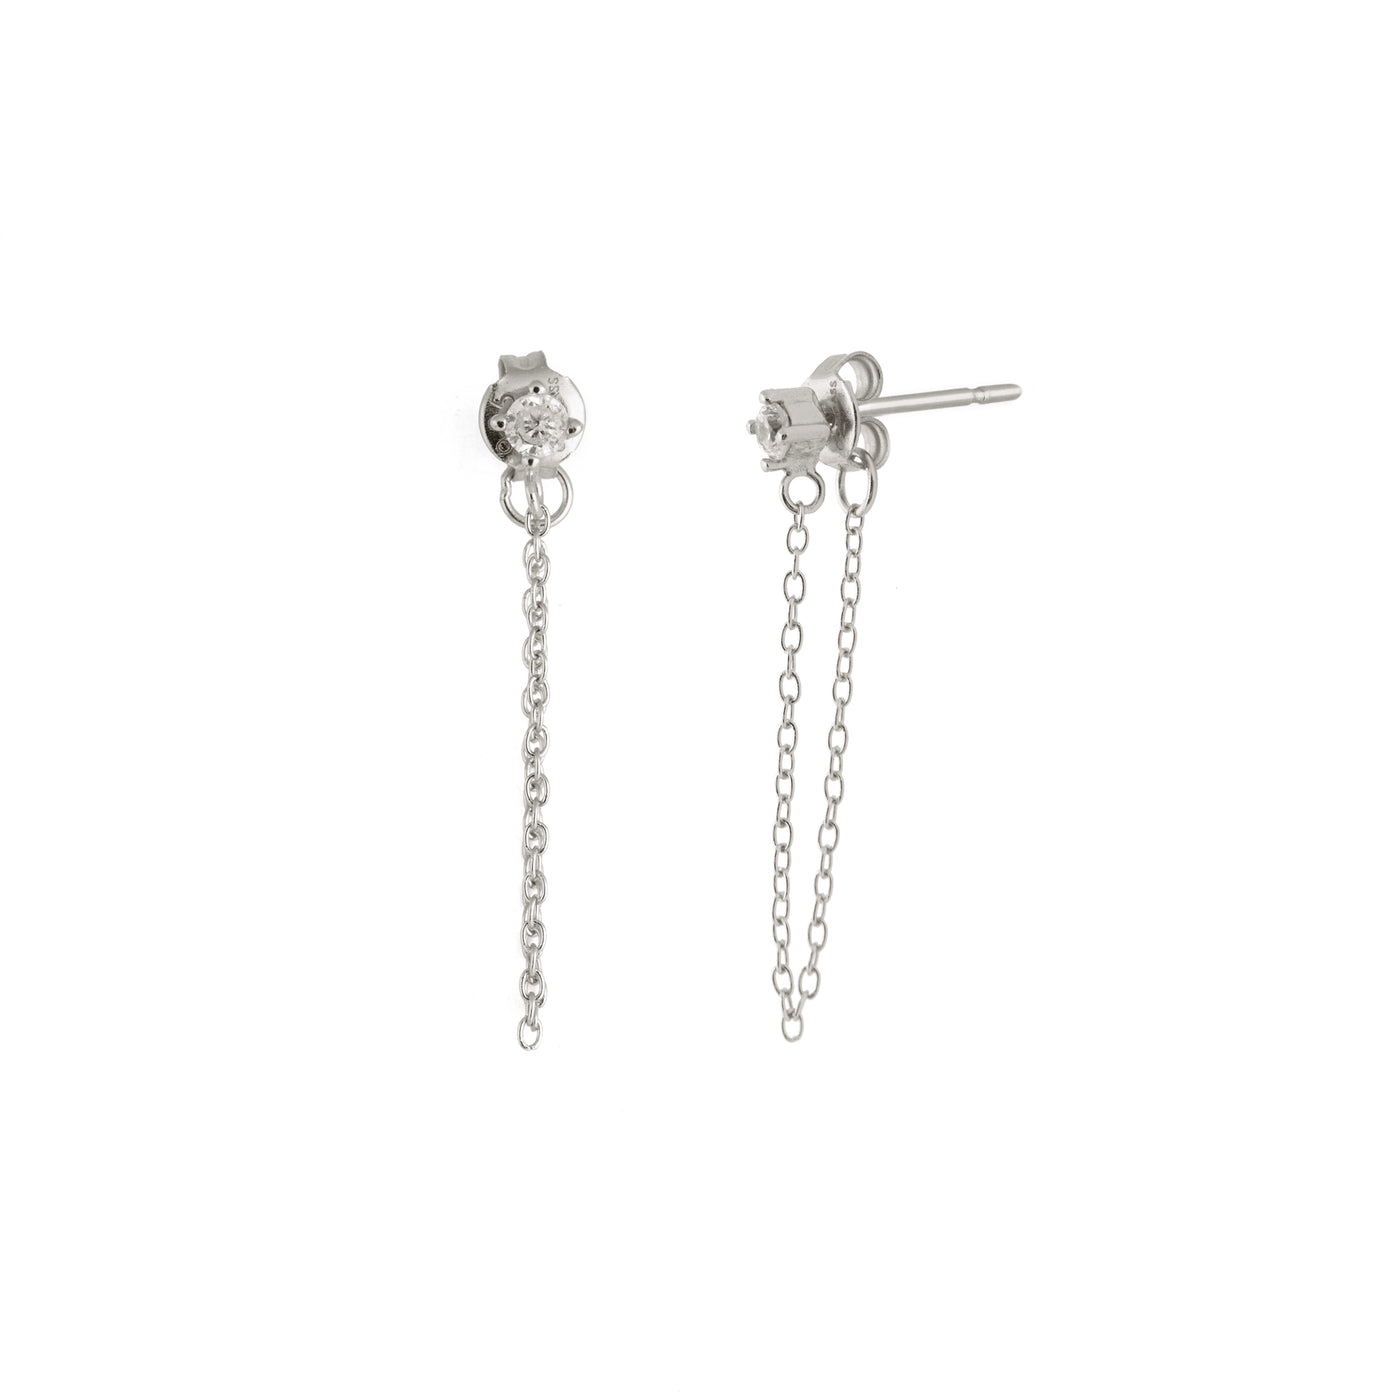 Chain Studs - Argent Sterling